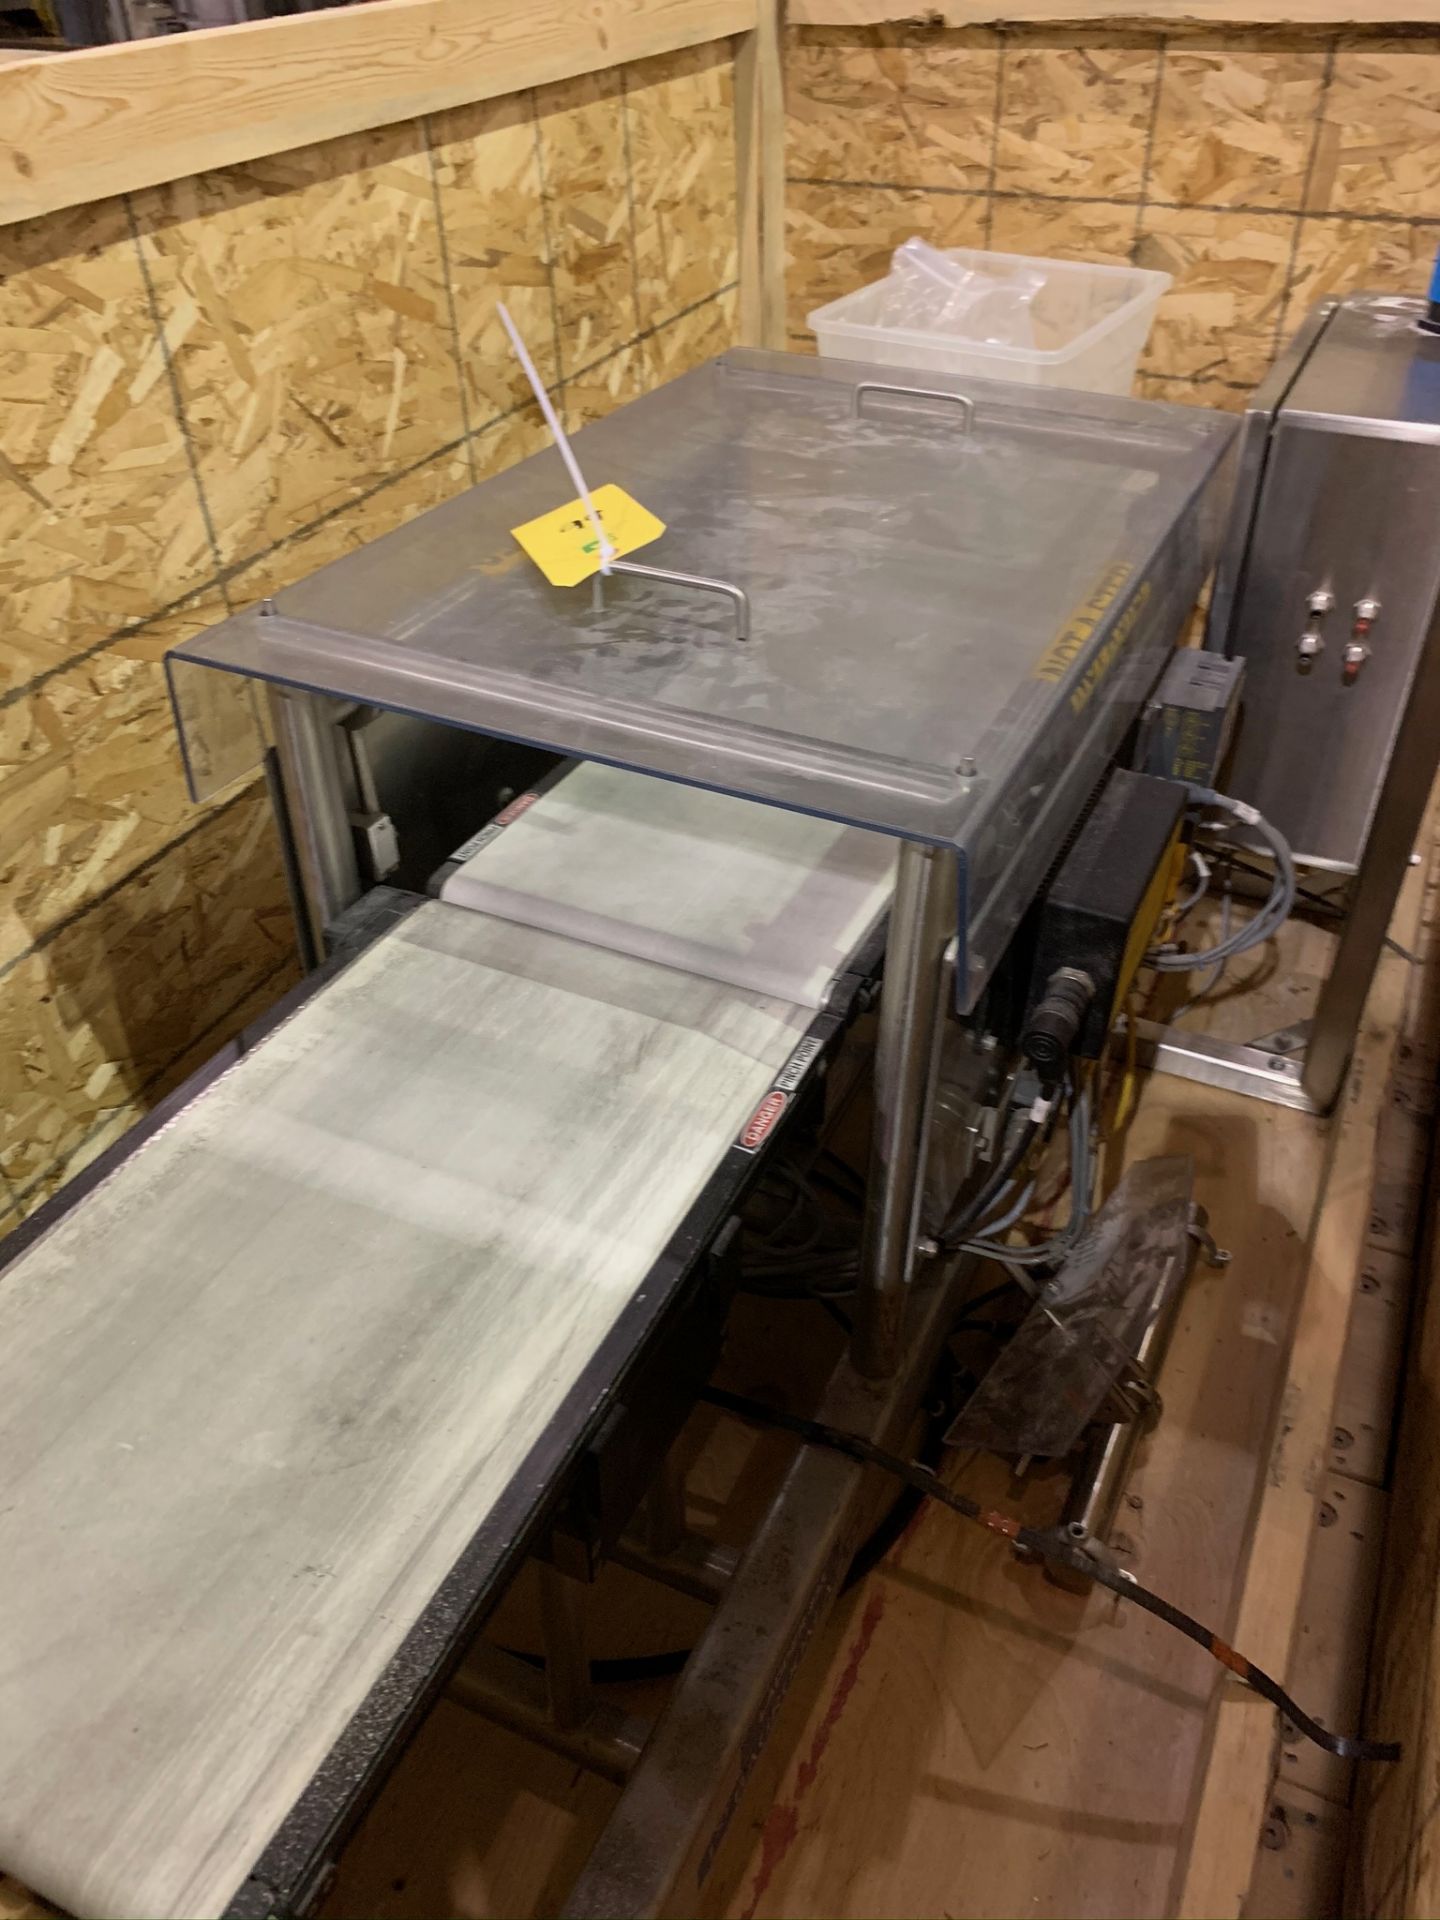 Speedee Inline Checkweigher S/N CW134 (Rigging Fee - $50) - Image 5 of 5